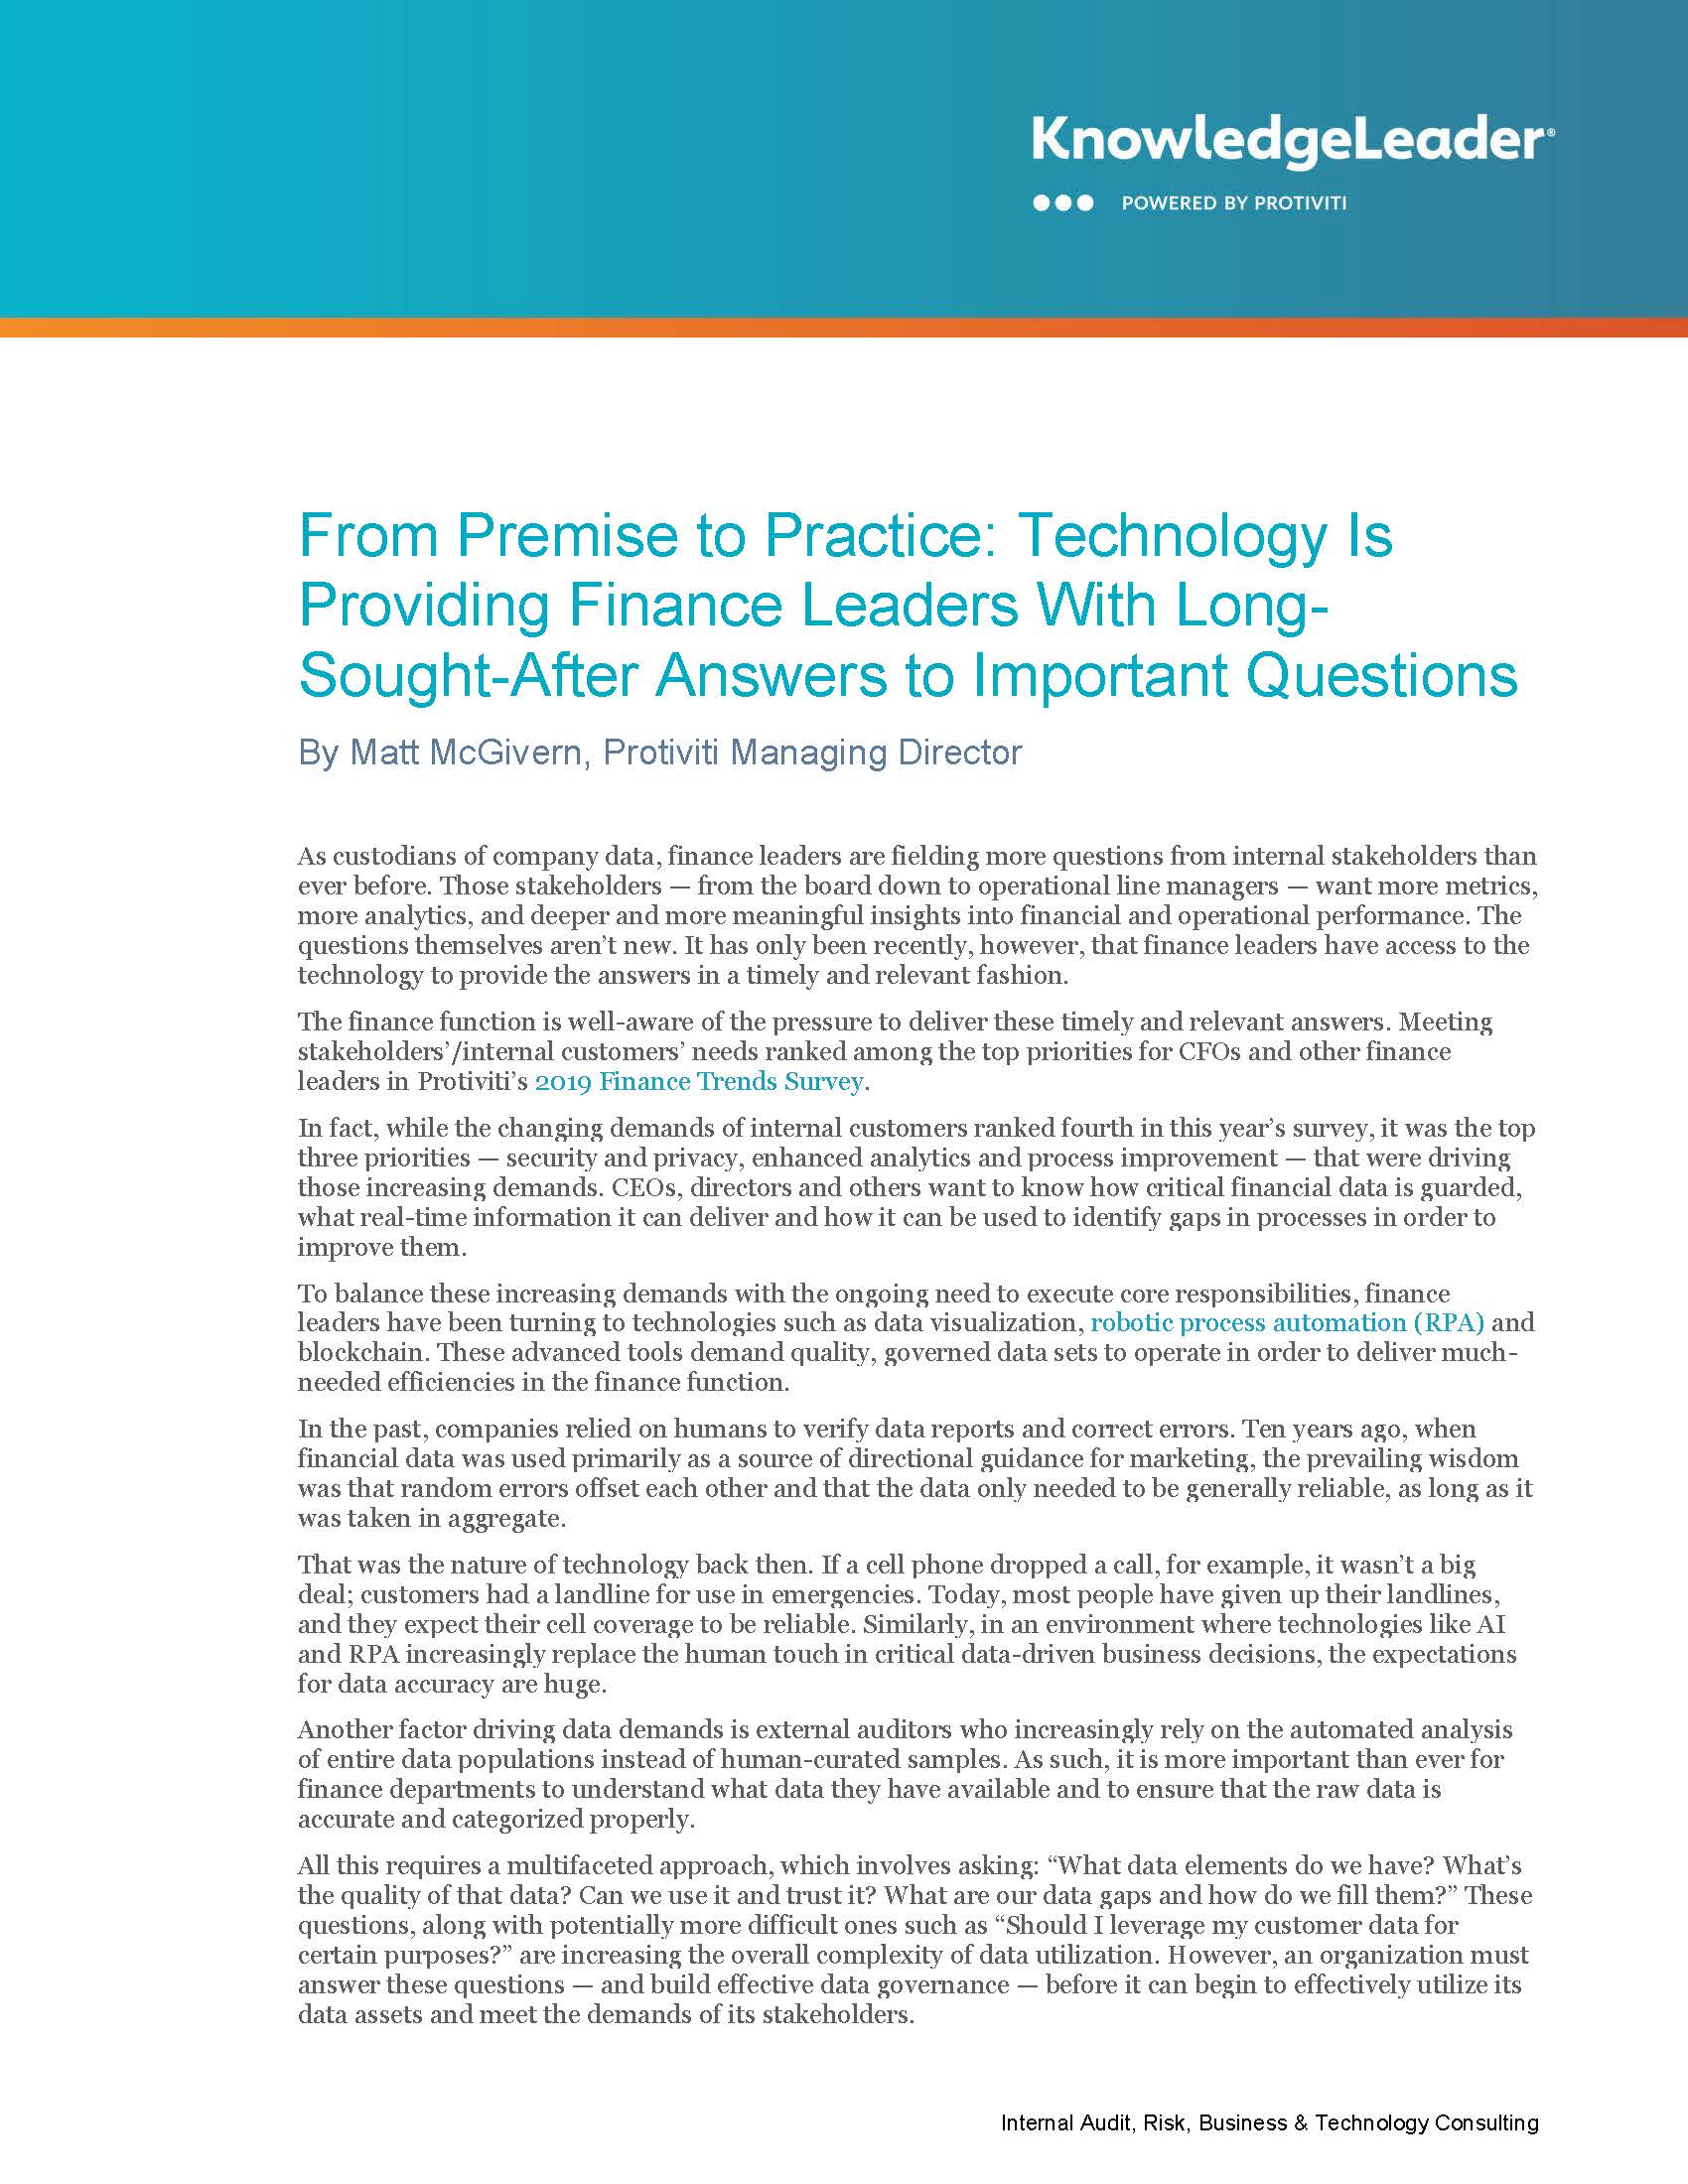 Screenshot of the first page of From Premise to Practice Technology Is Providing Finance Leaders With Long-Sought-After Answers to Important Questions